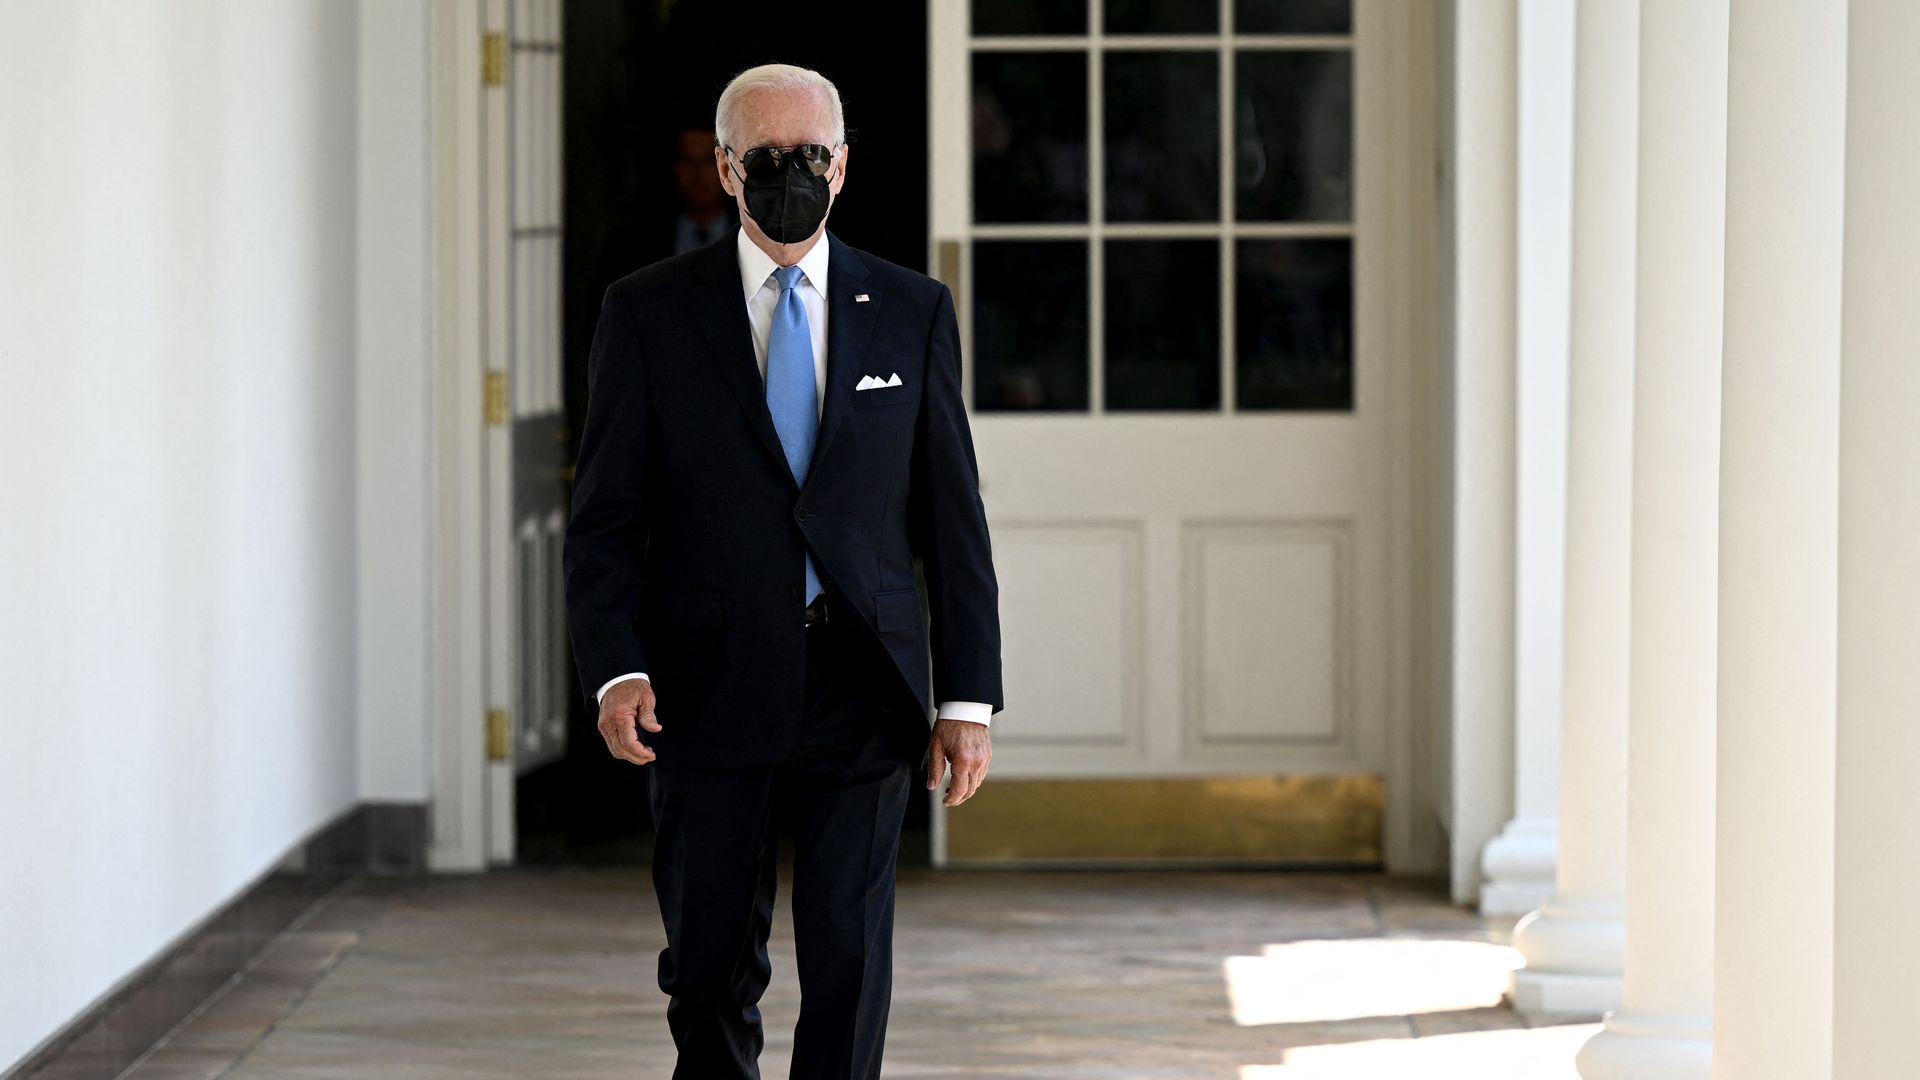 President Biden, wearing a mask, walks out of the White House toward the Rose Garden.